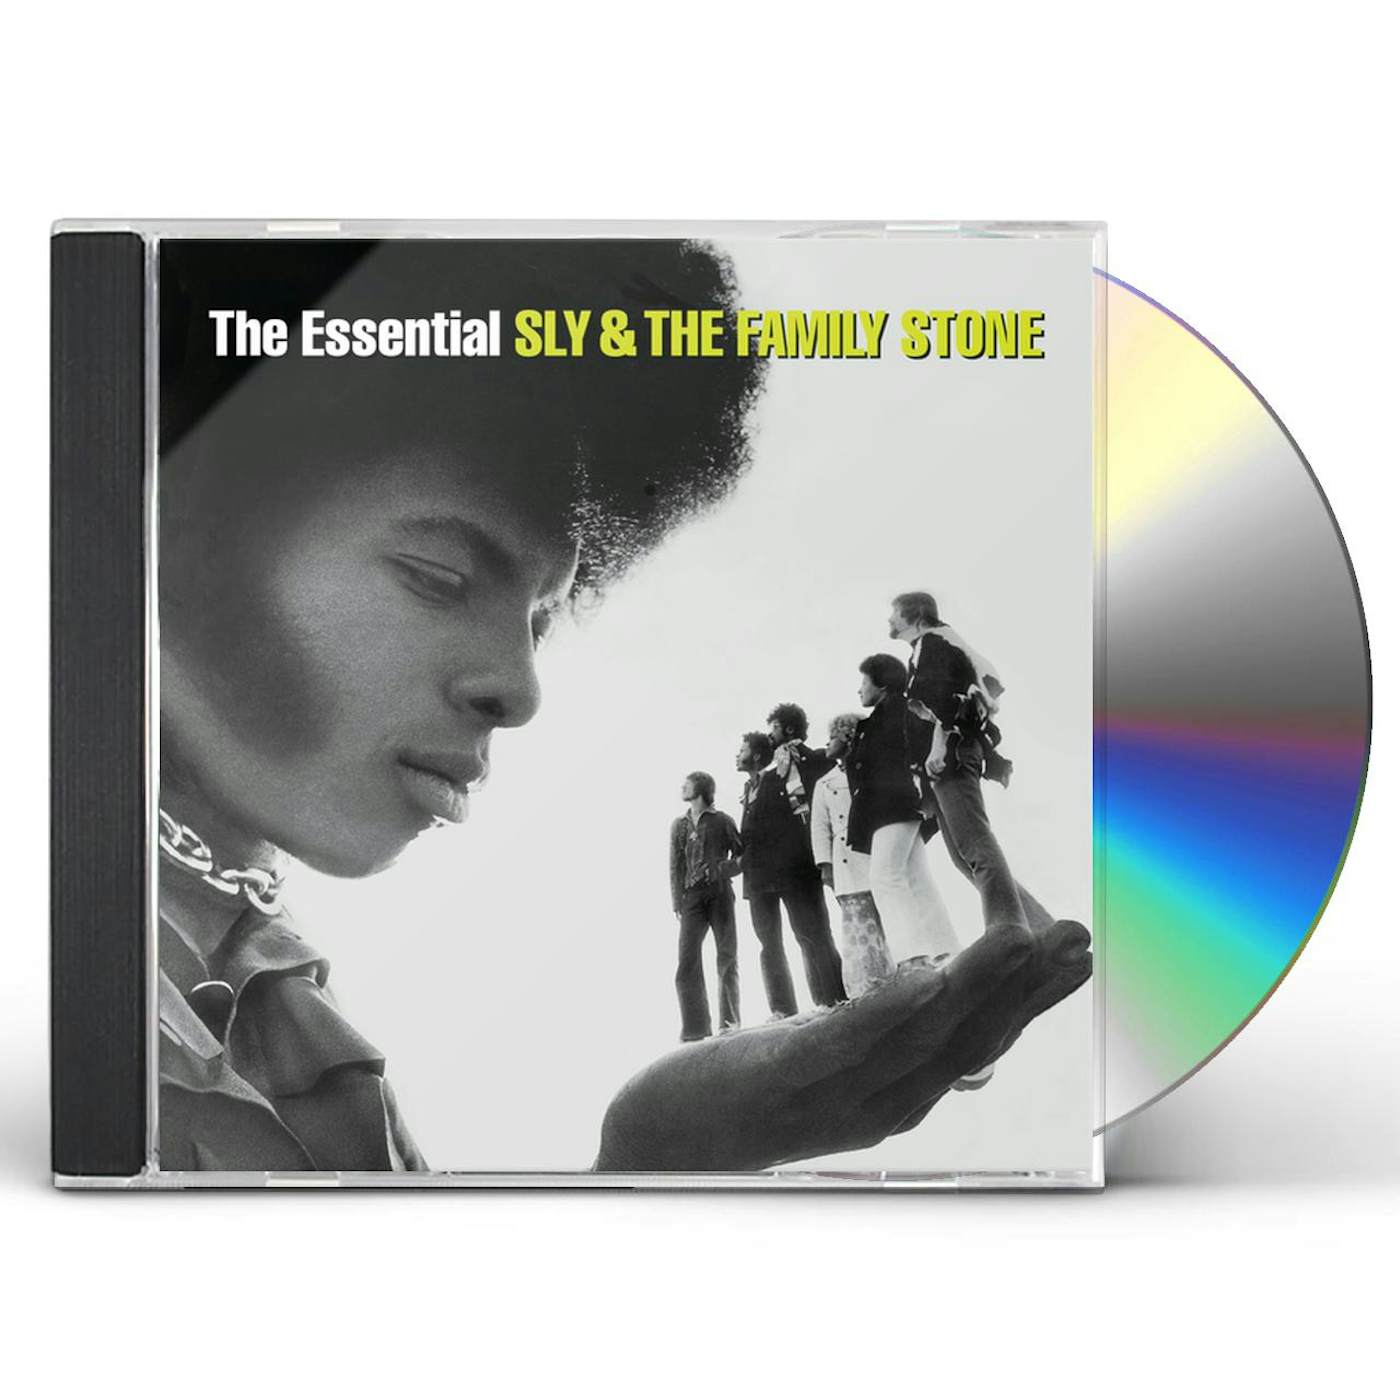 ESSENTIAL Sly & The Family Stone CD